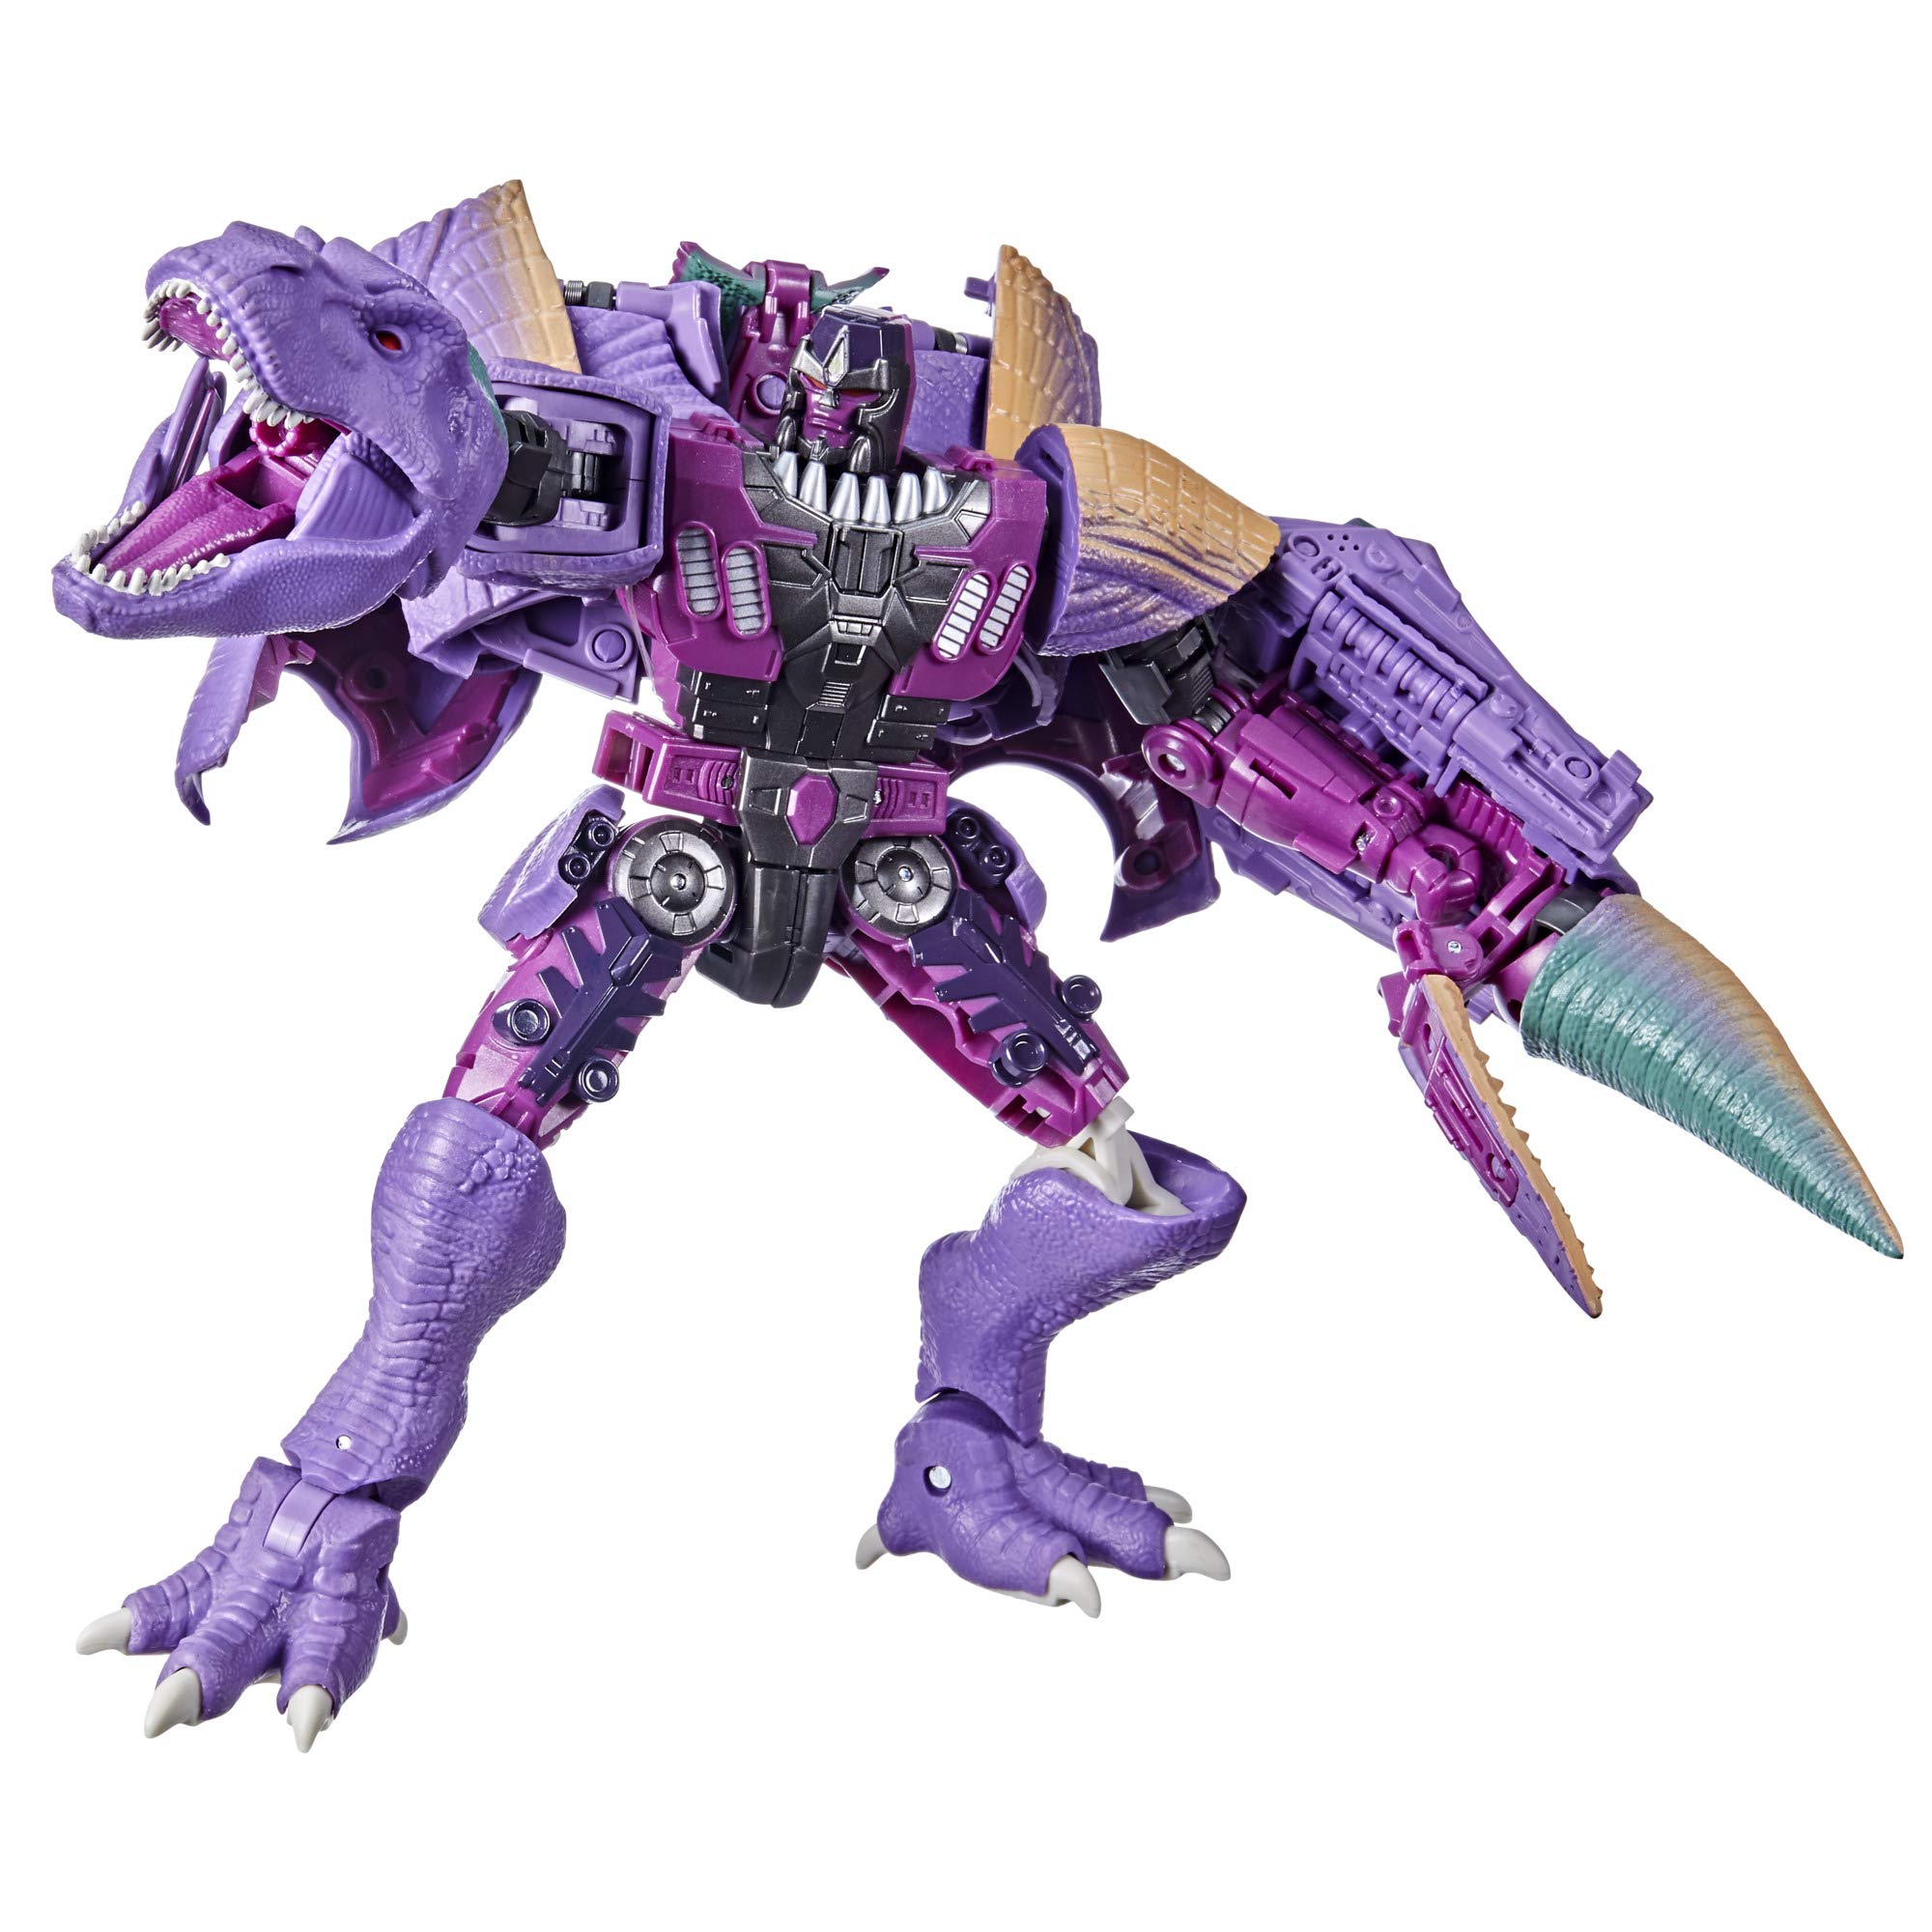 Transformers Toys Generations War for Cybertron: Kingdom Leader WFC-K10 Megatron (Beast) Action Figure - Kids Ages 8 and Up, 7.5